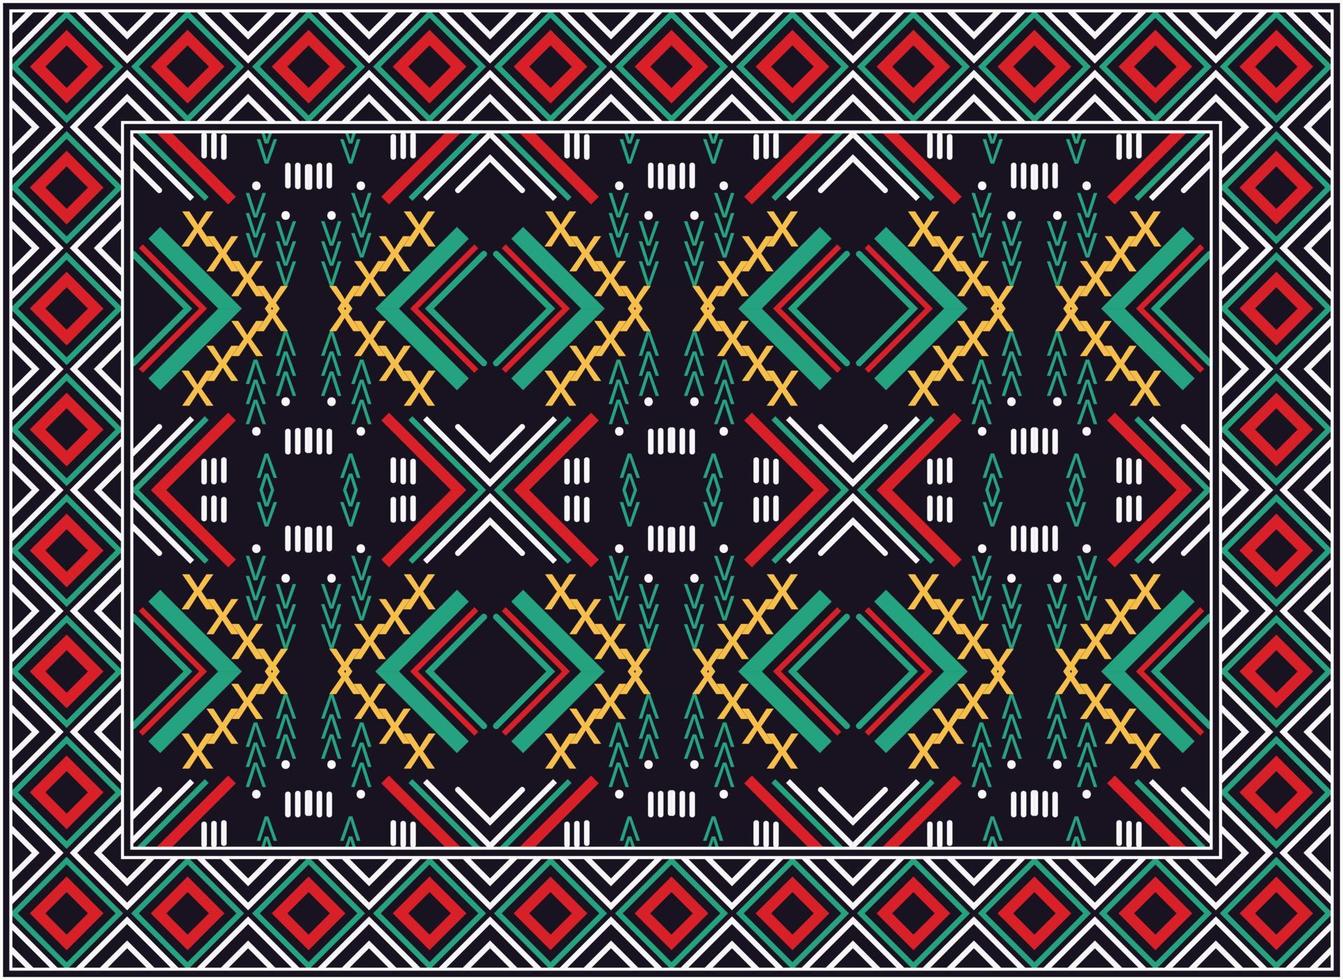 Antique Persian carpet, African Motif modern Persian rug, African Ethnic Aztec style design for print fabric Carpets, towels, handkerchiefs, scarves rug, vector